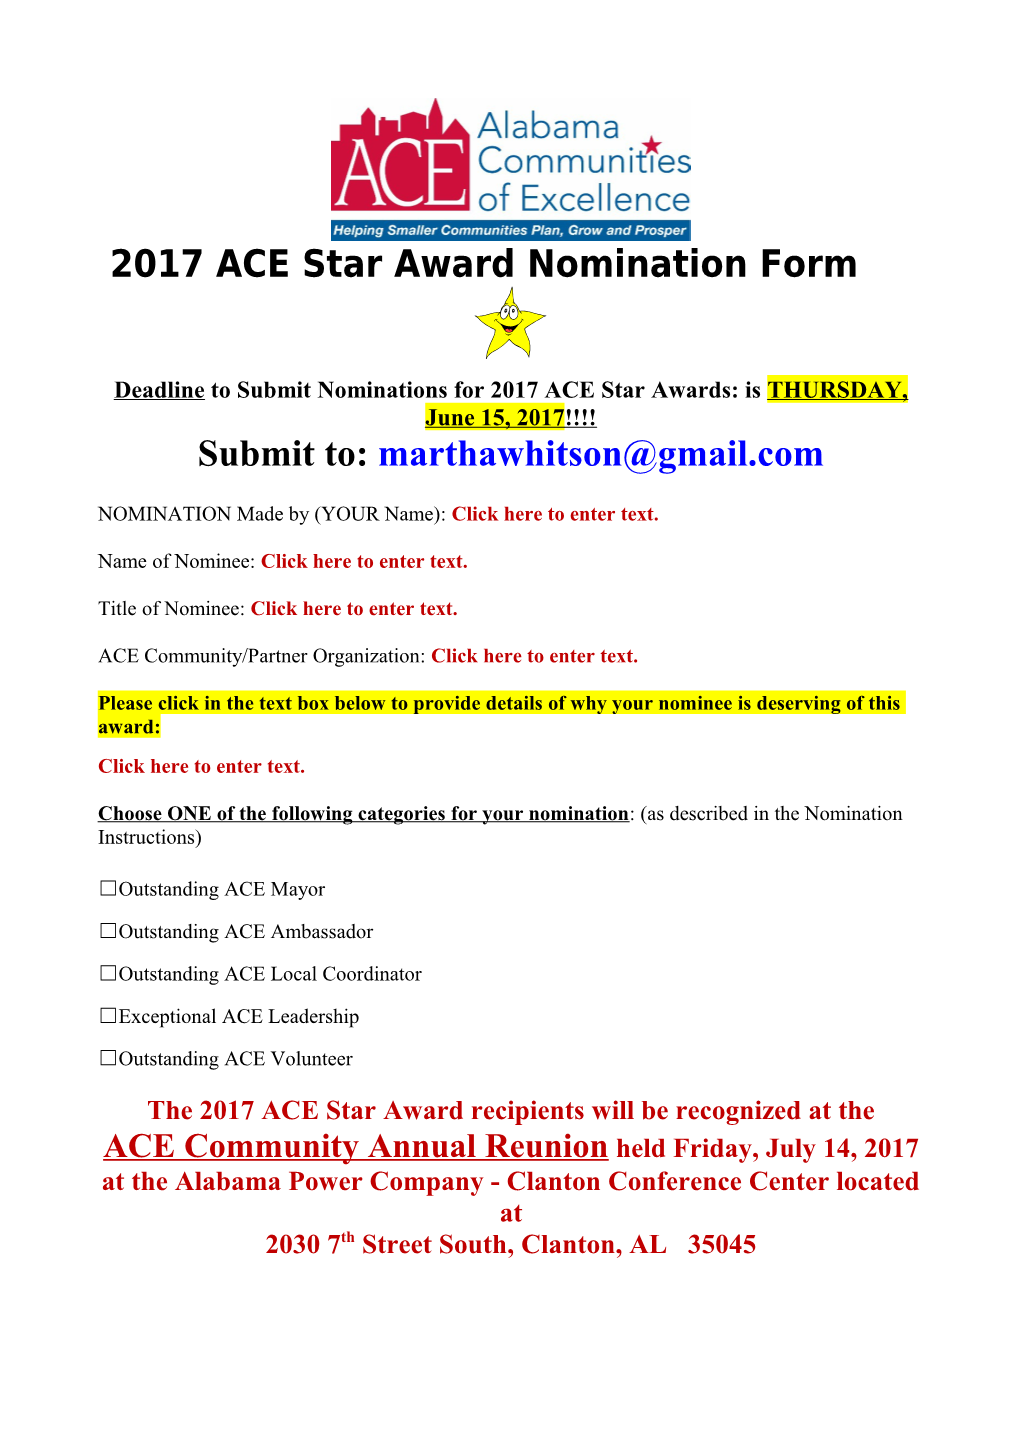 Deadline to Submit Nominations for 2017 ACE Star Awards: Is THURSDAY, June 15, 2017